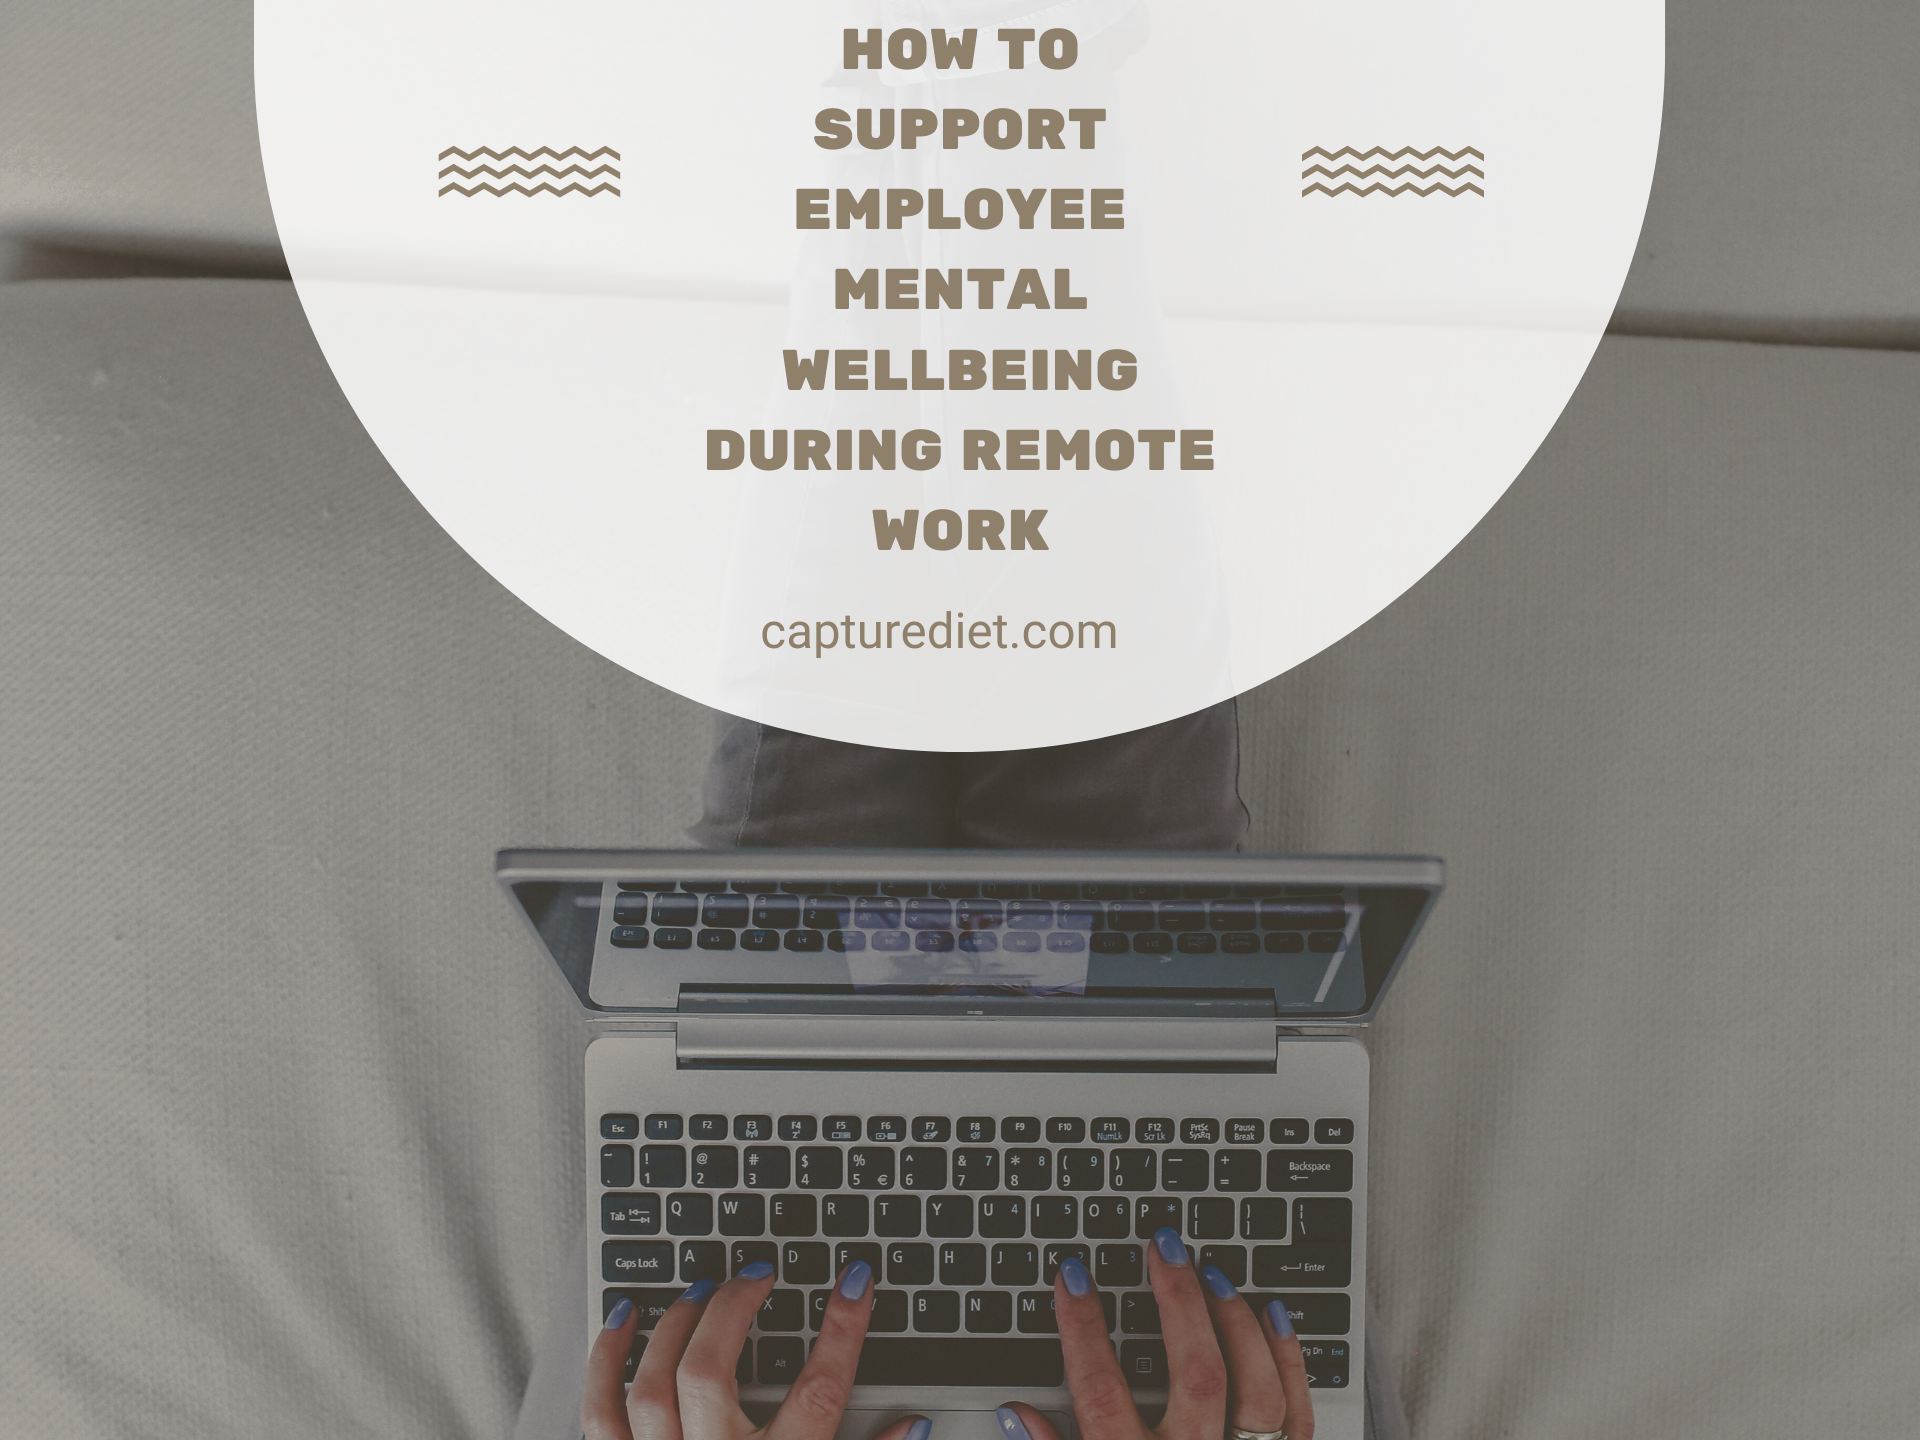 "How to Support Employee Mental Wellbeing during Remote Work"